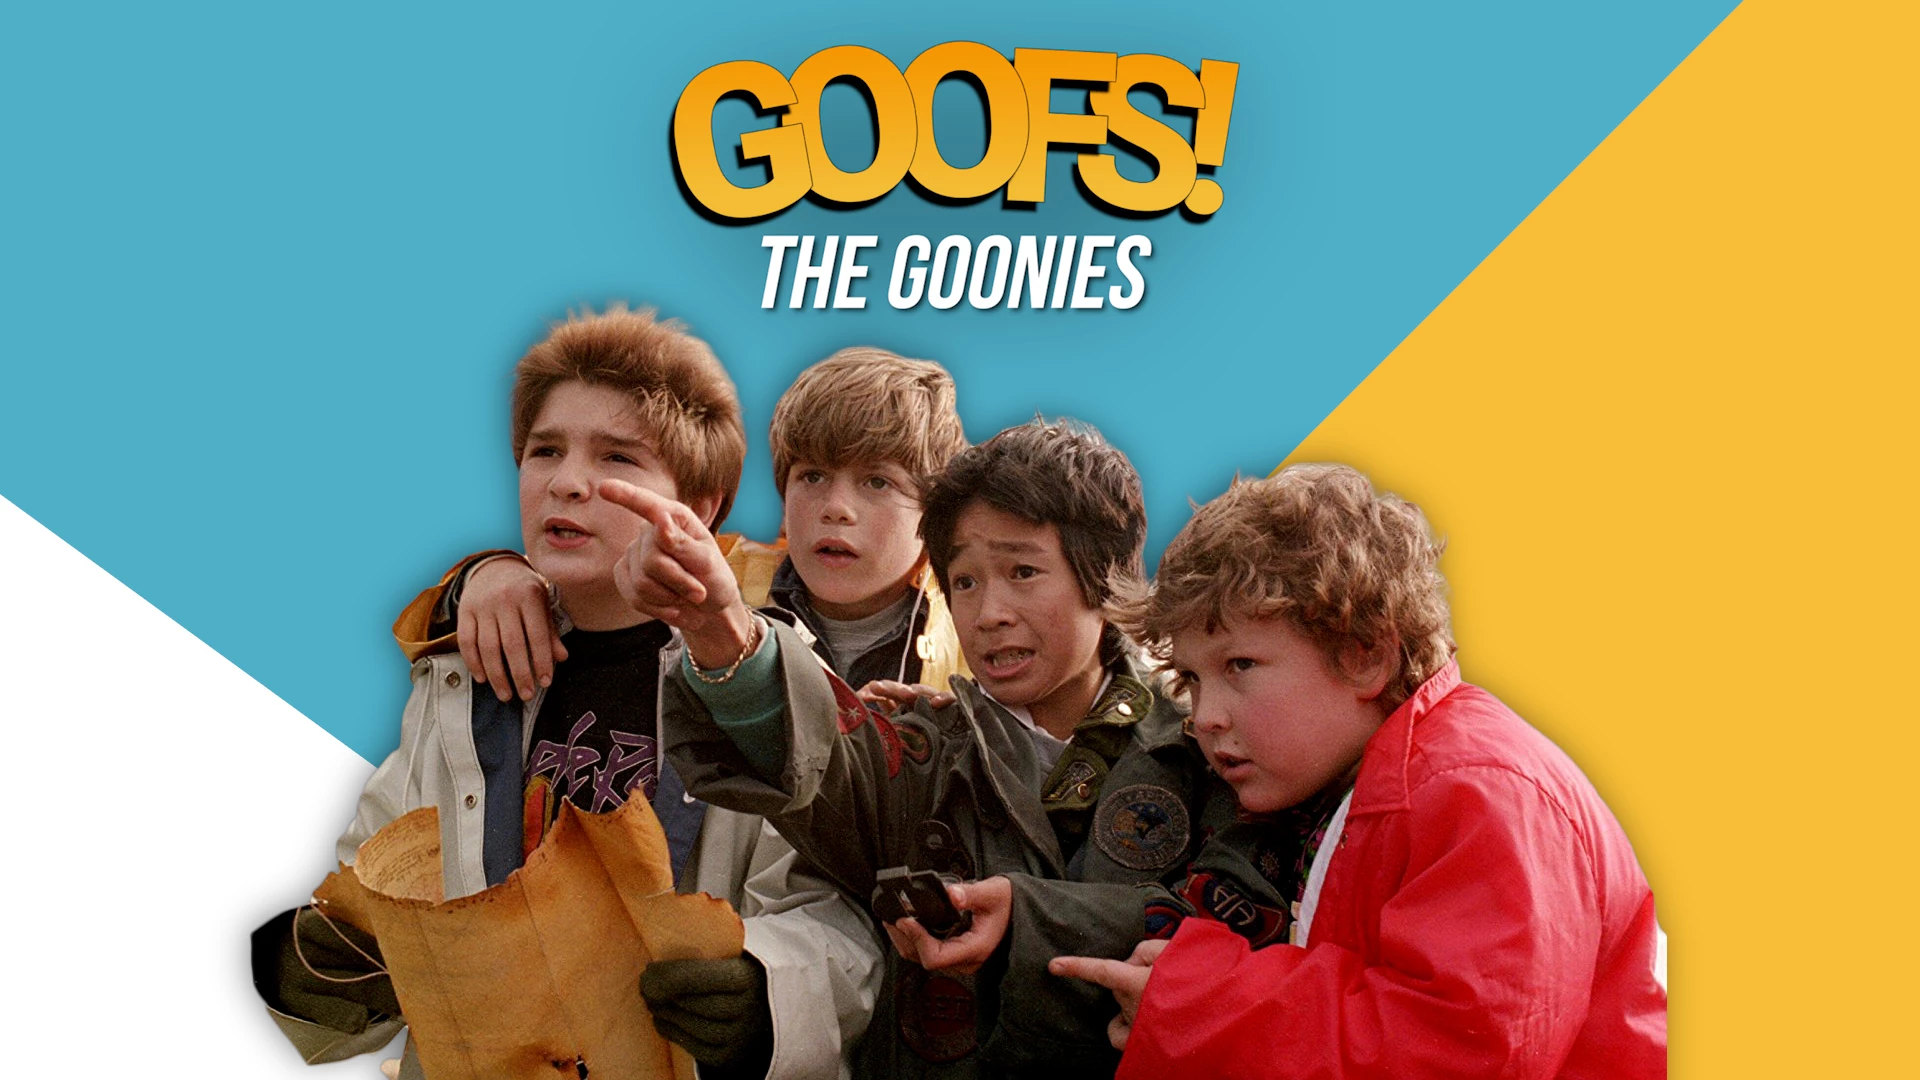 movies like pirates of the caribbean - The Goonies (1985)